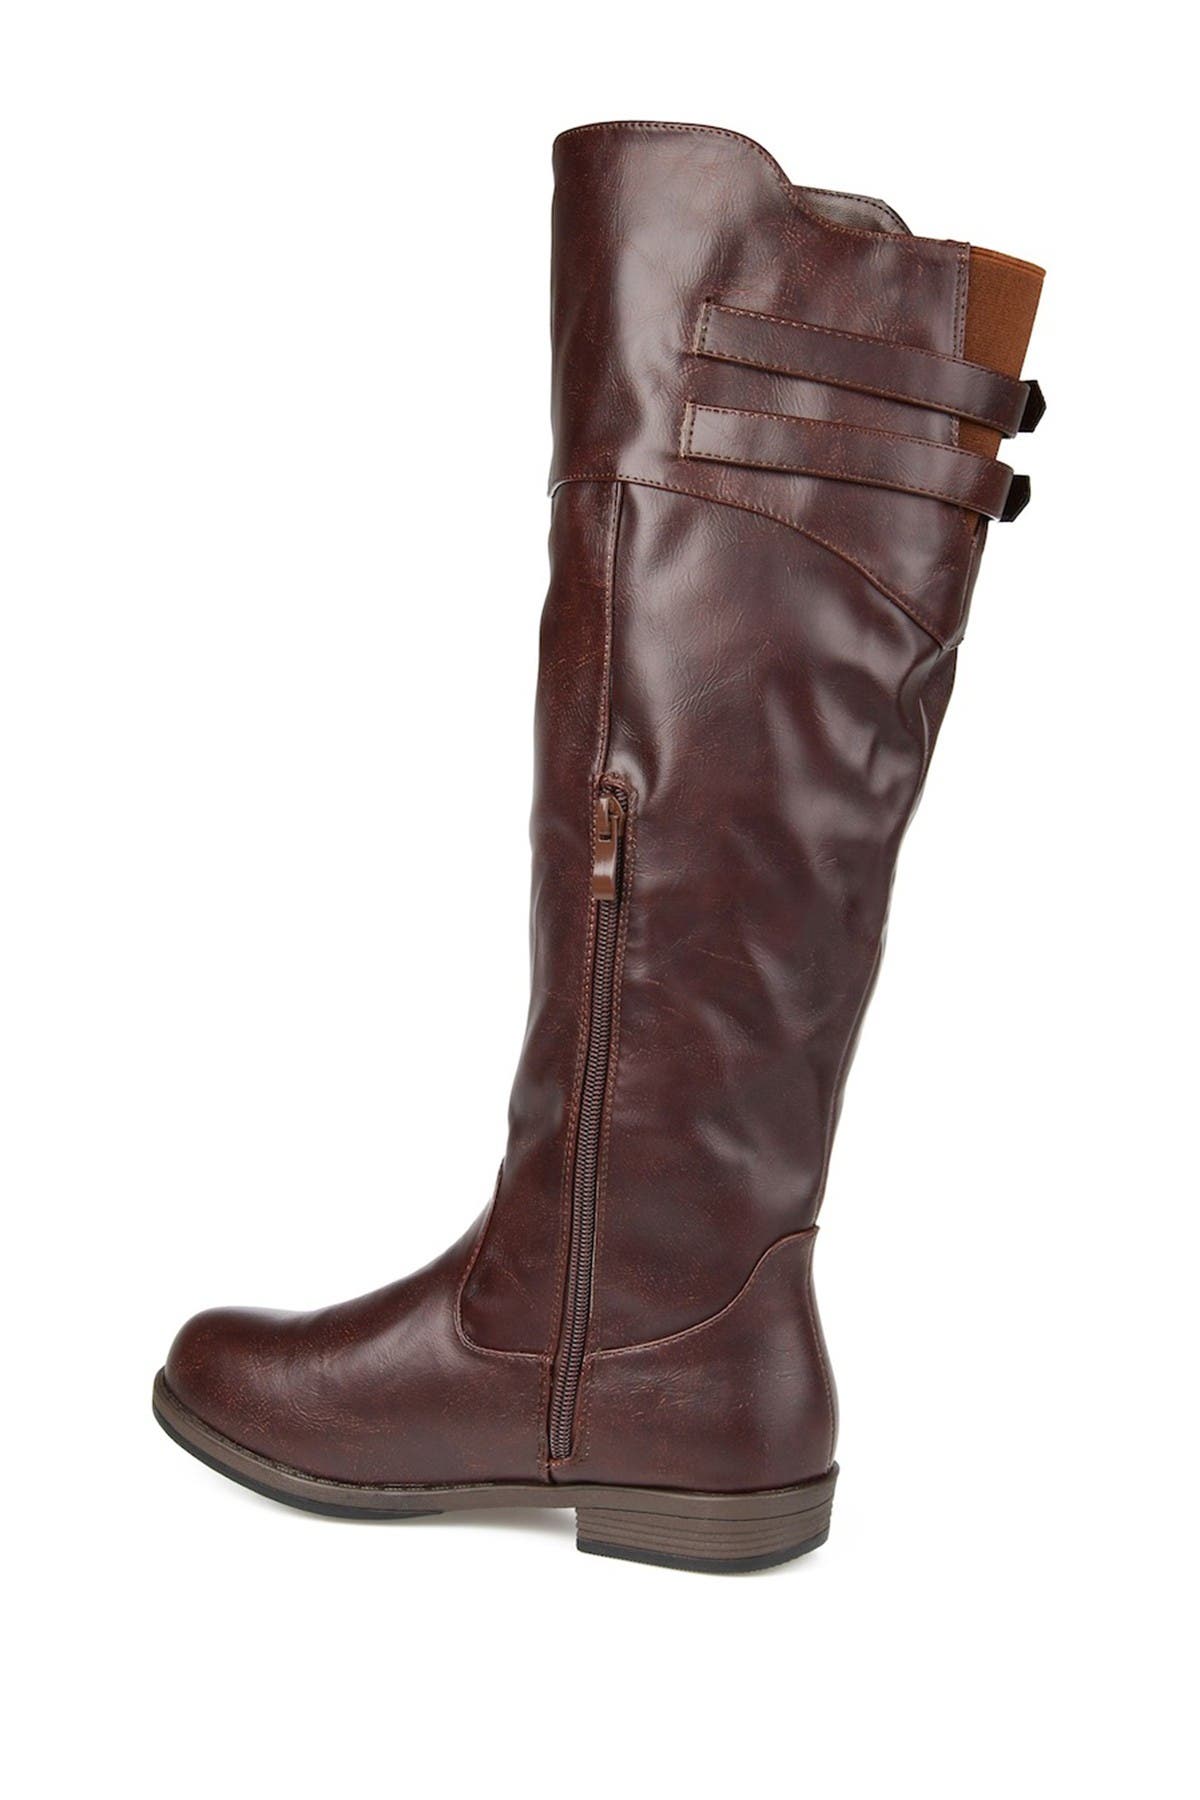 journee collection tori boot